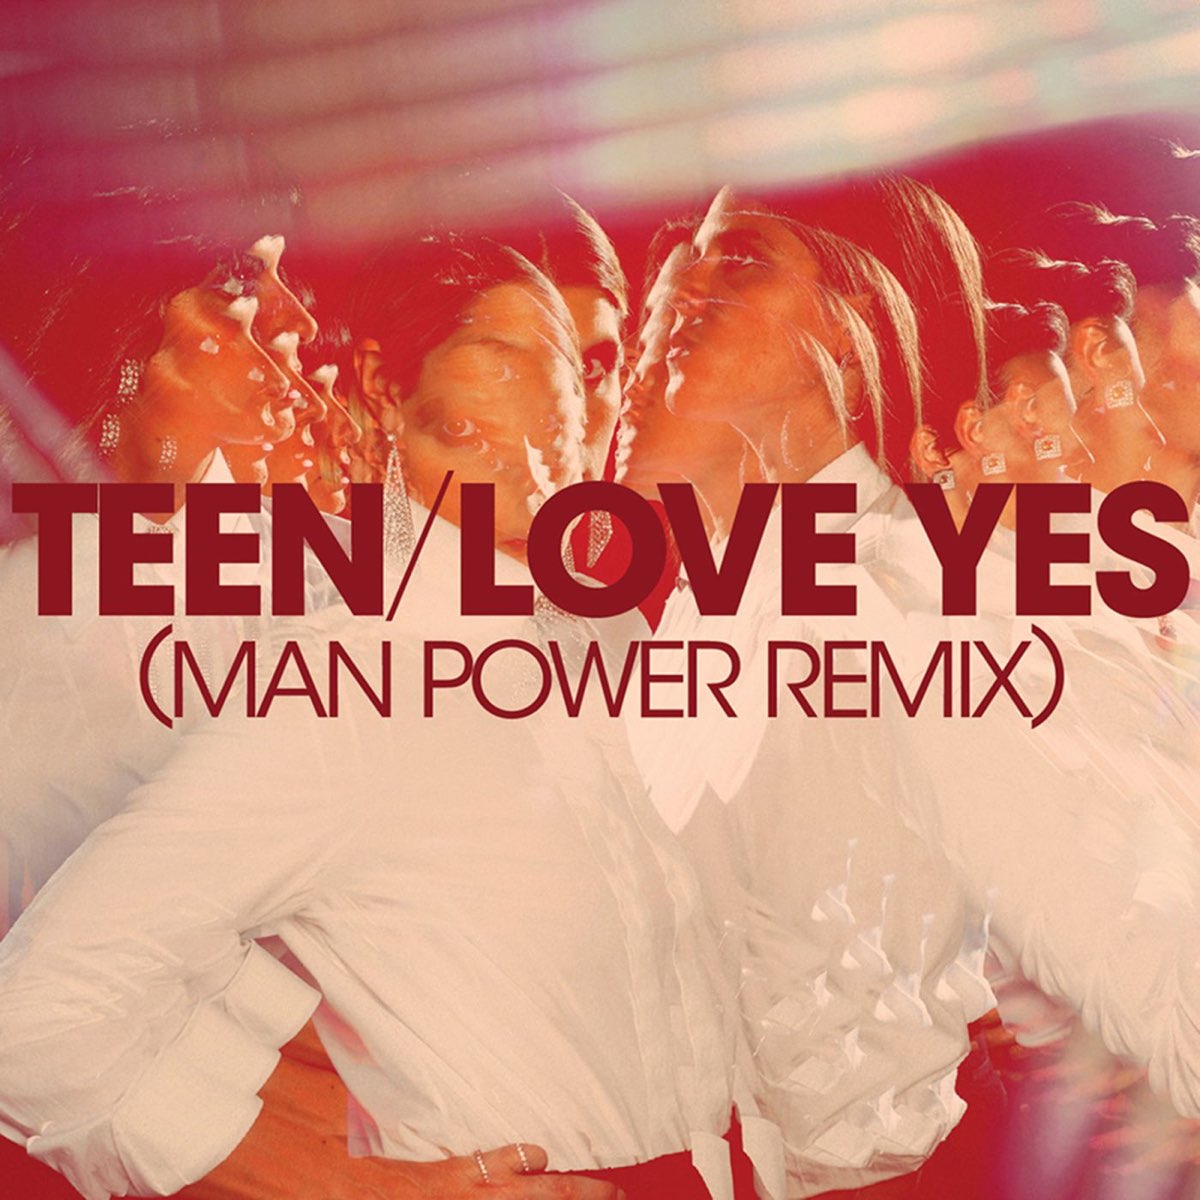 Teen Love Yes. Yes for Love. Music Power Remix. Loving Yes Hoplo.